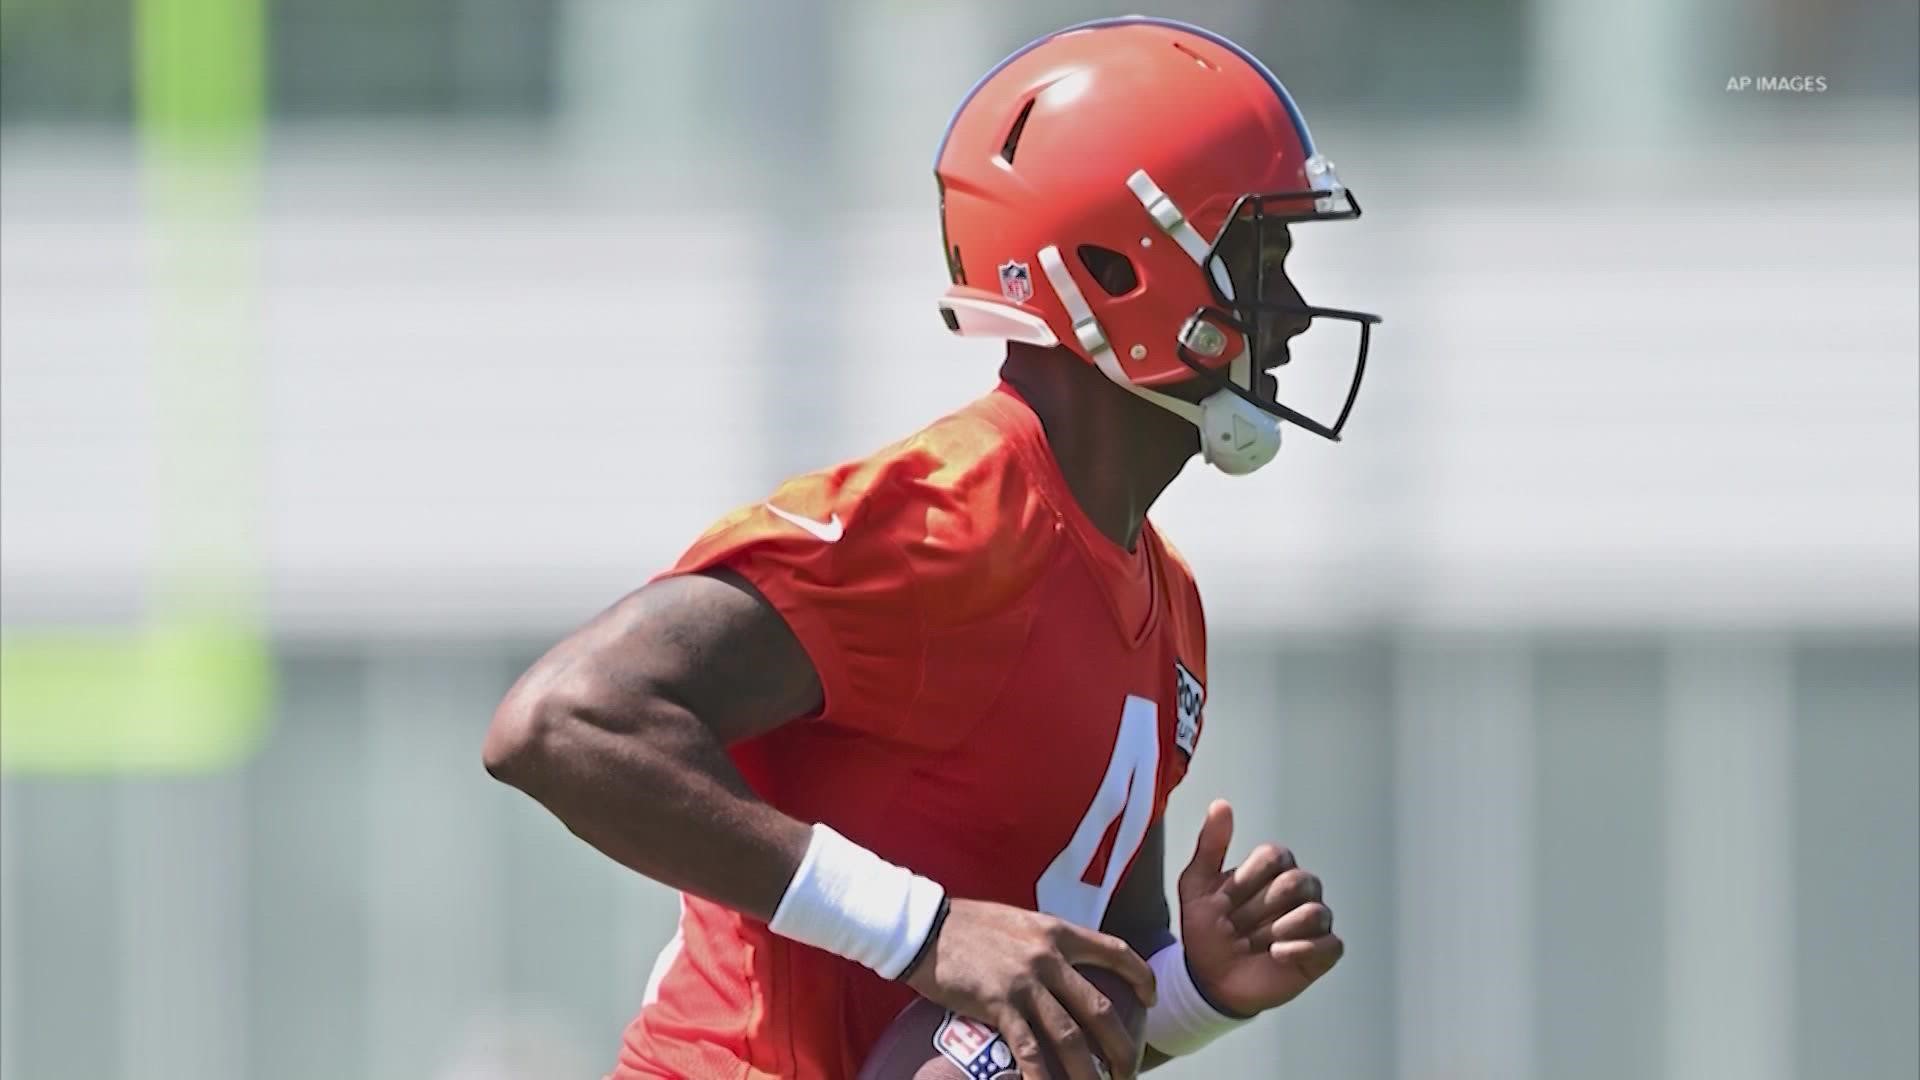 Cleveland Browns quarterback Deshaun Watson apologized Friday “to all the women I have impacted" after being accused by two dozen women of sexual misconduct.